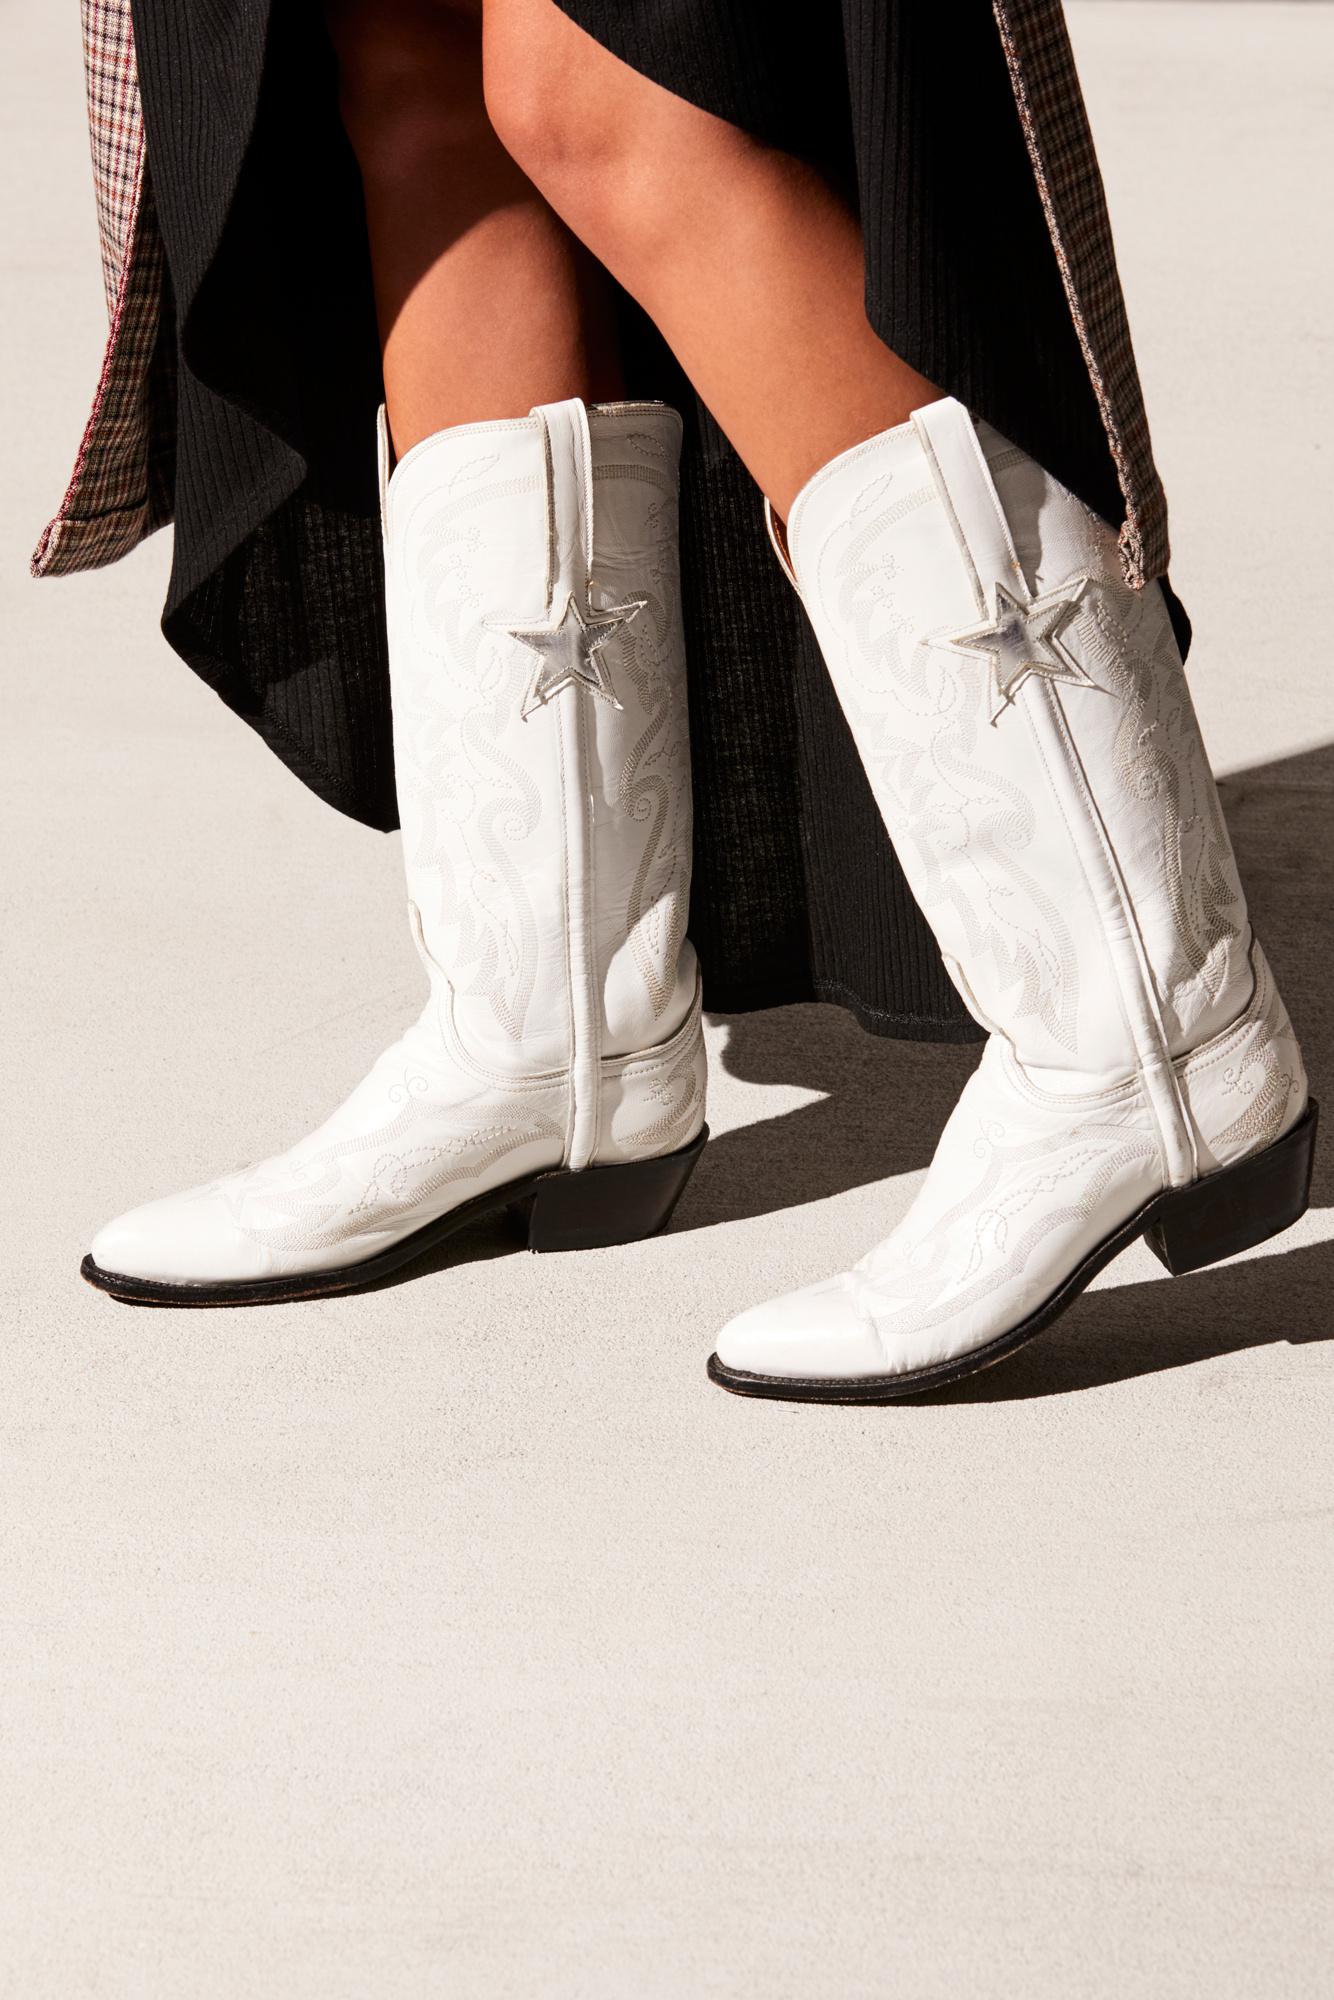 Free People Moon and Back White Western Boots Size 37